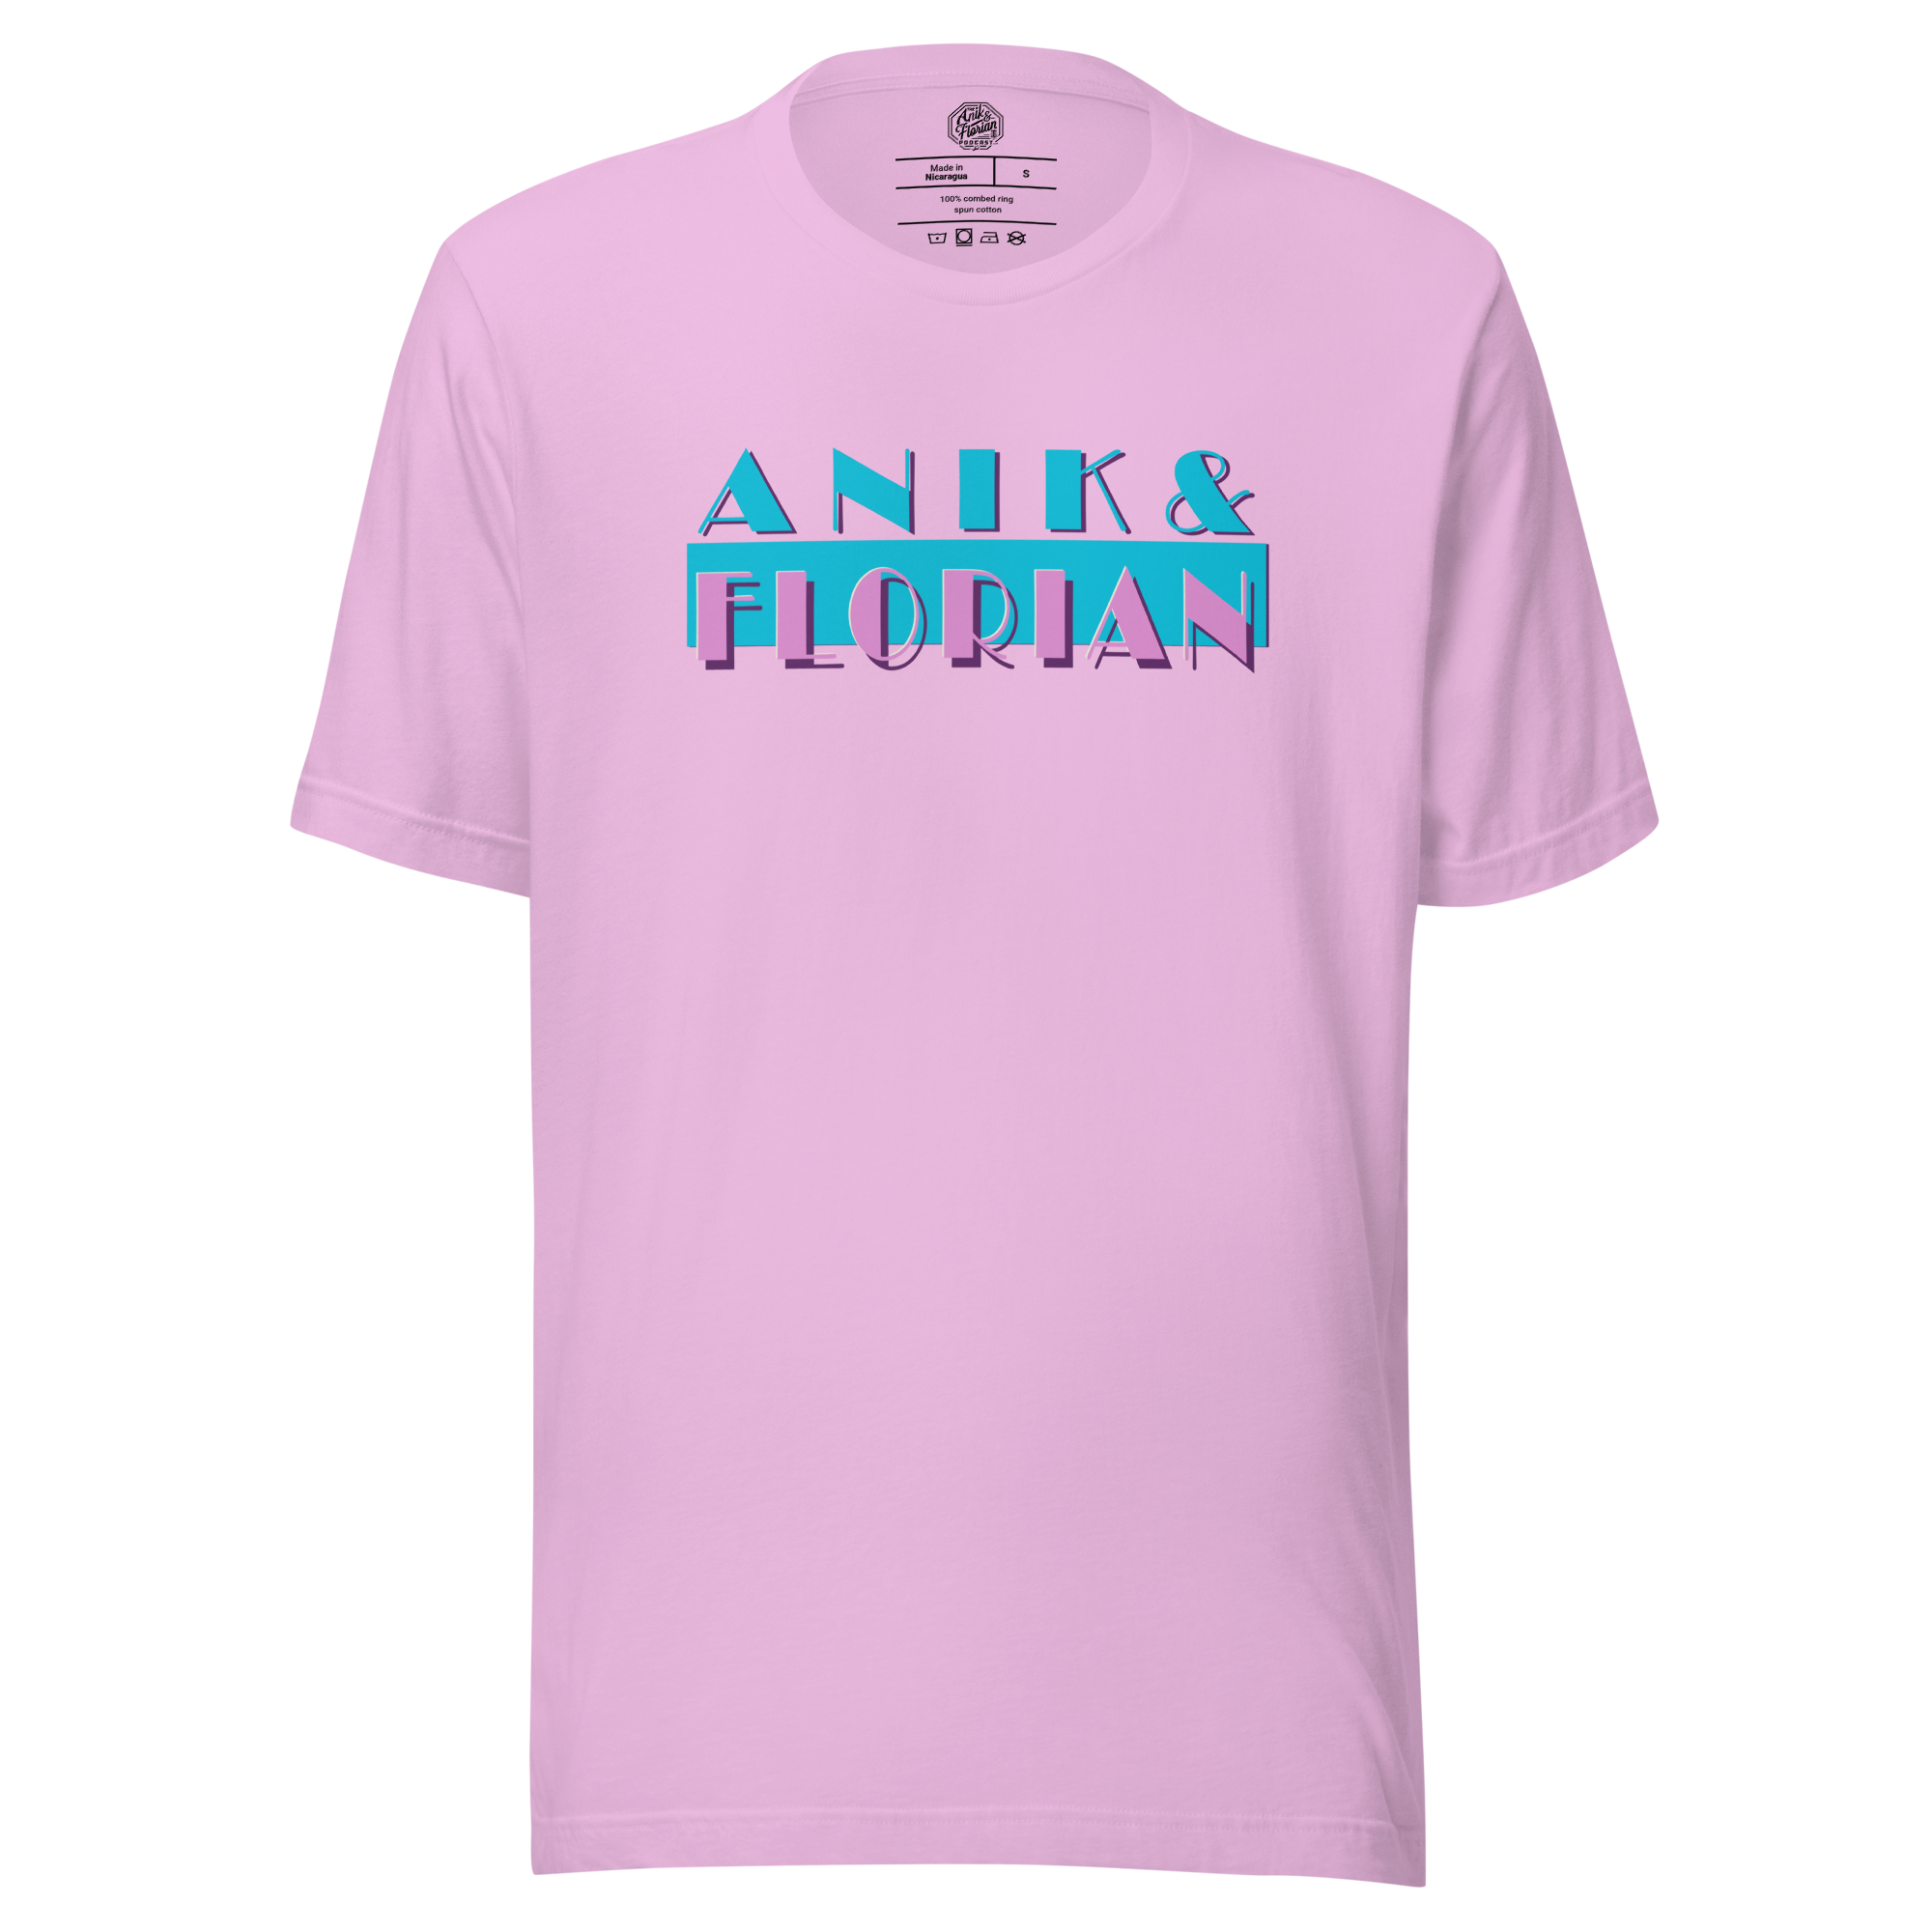 Anik & Florian Podcast Miami Vice inspired by Average Joe Art T-shirt in Lilac